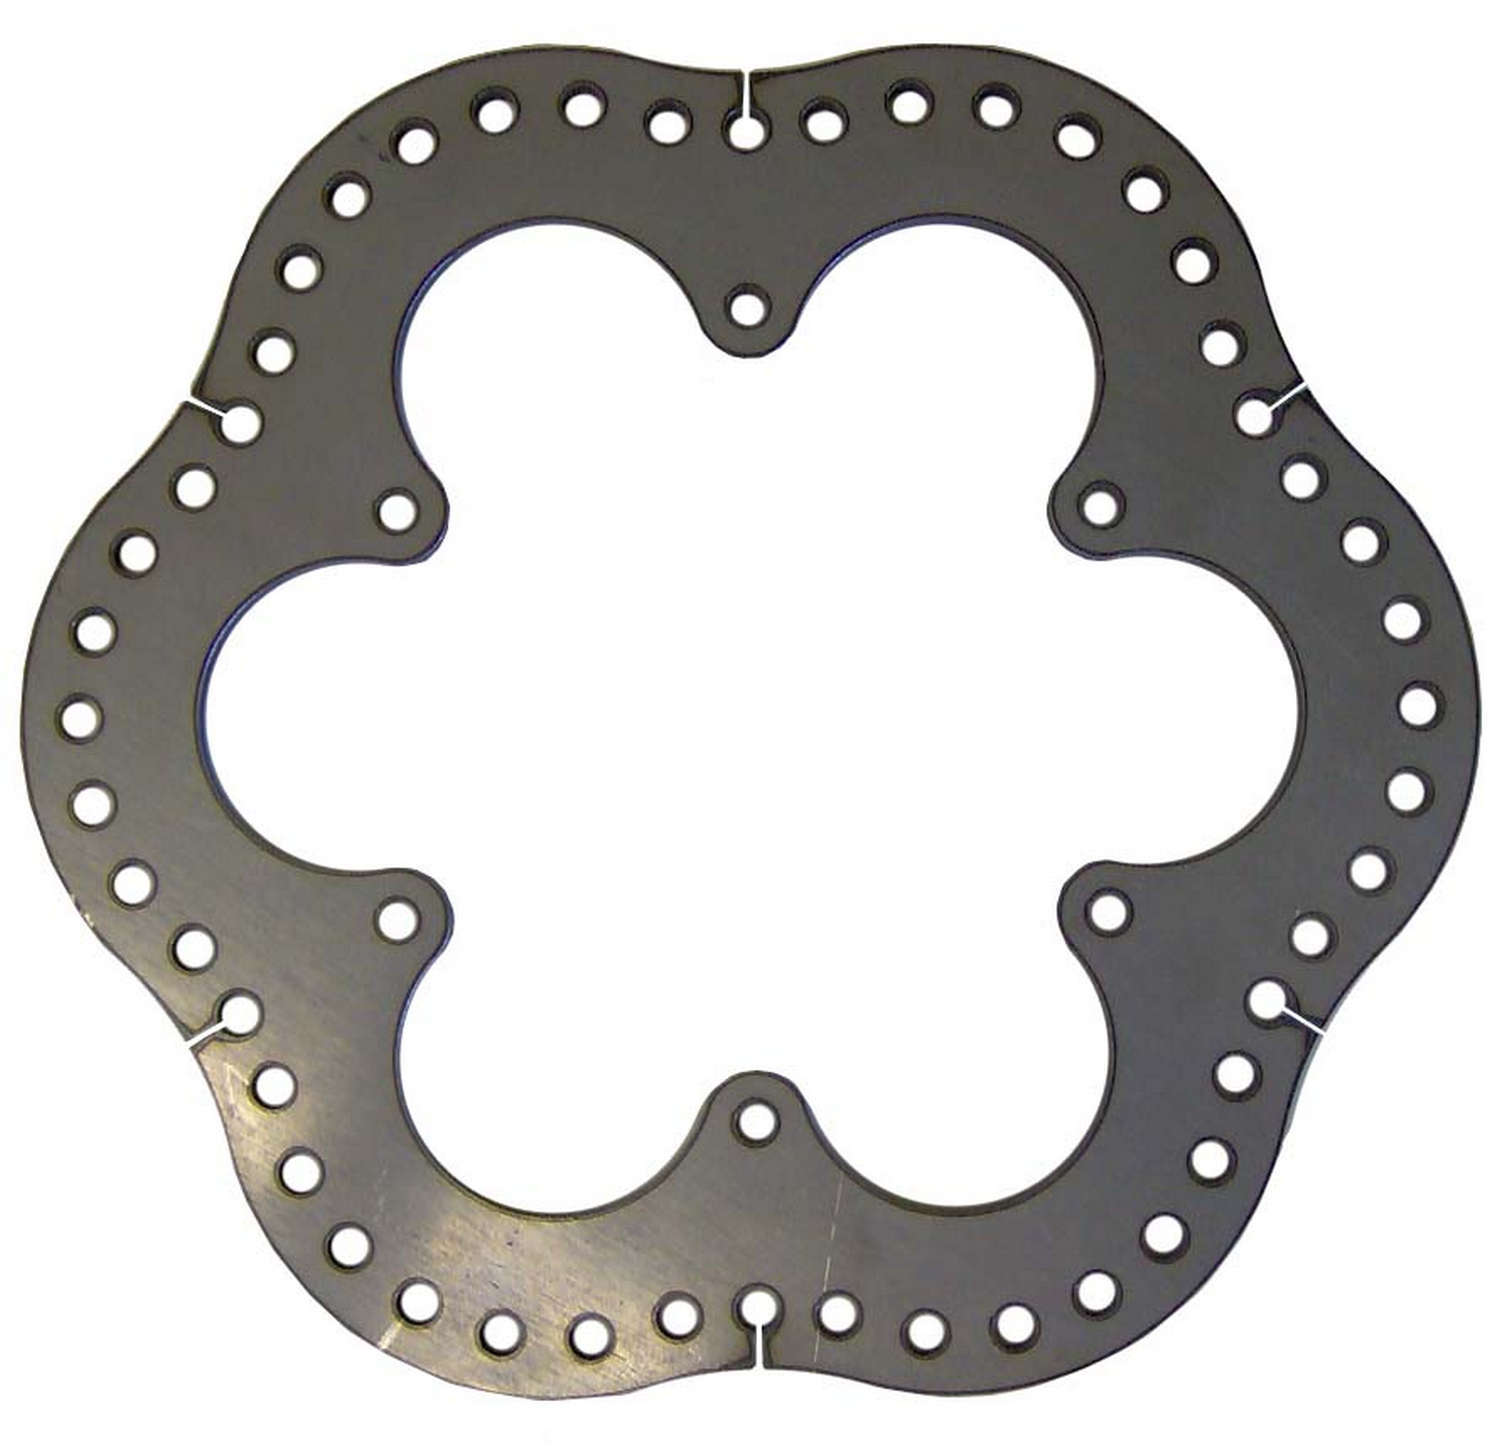 Triple X Race Components 600-BK-0001 Brake Rotor, Ultralite, Drilled / Scalloped, 9.500 in OD, 0.1875 in Thick, 6 x 5.250 in Bolt Pattern, Steel, Natural, Each